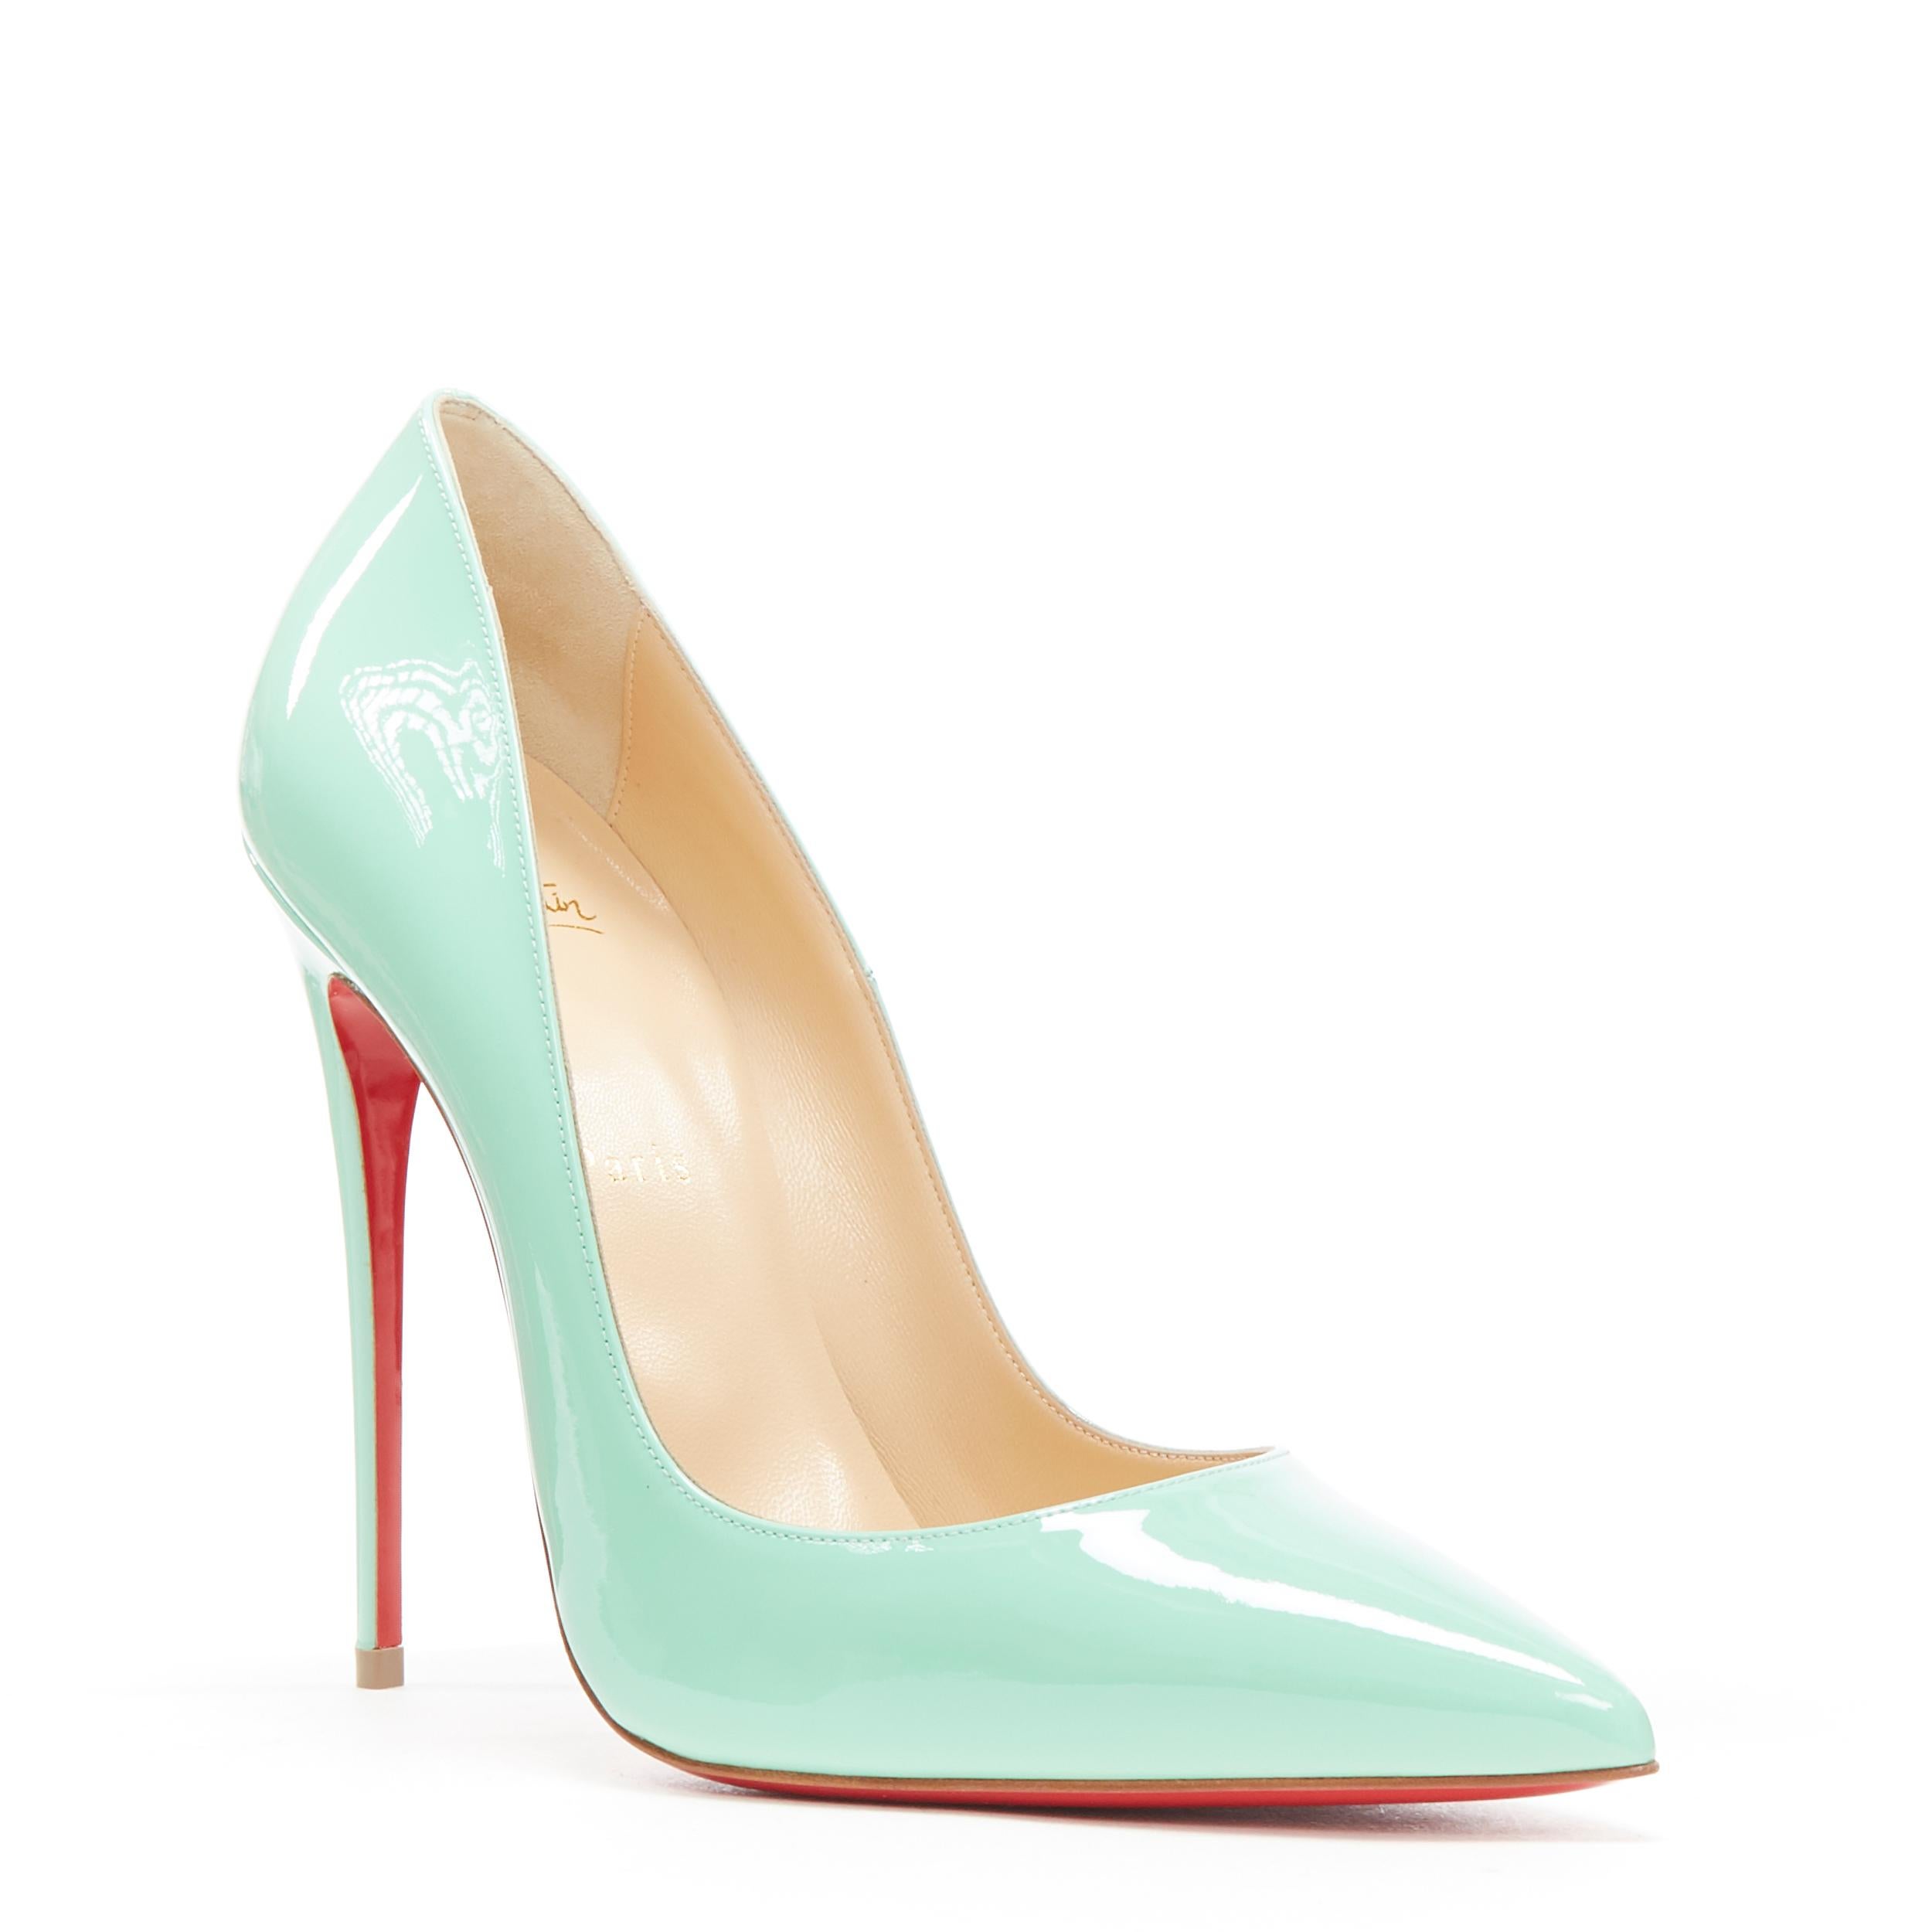 new CHRISTIAN LOUBOUTIN So Kate 120 opal blue patent pigalle pump EU40.5
Brand: Christian Louboutin
Designer: Christian Louboutin
Model Name / Style: So Kate 120
Material: Patent leather
Color: Blue
Pattern: Solid
Extra Detail: Style code: 3130694